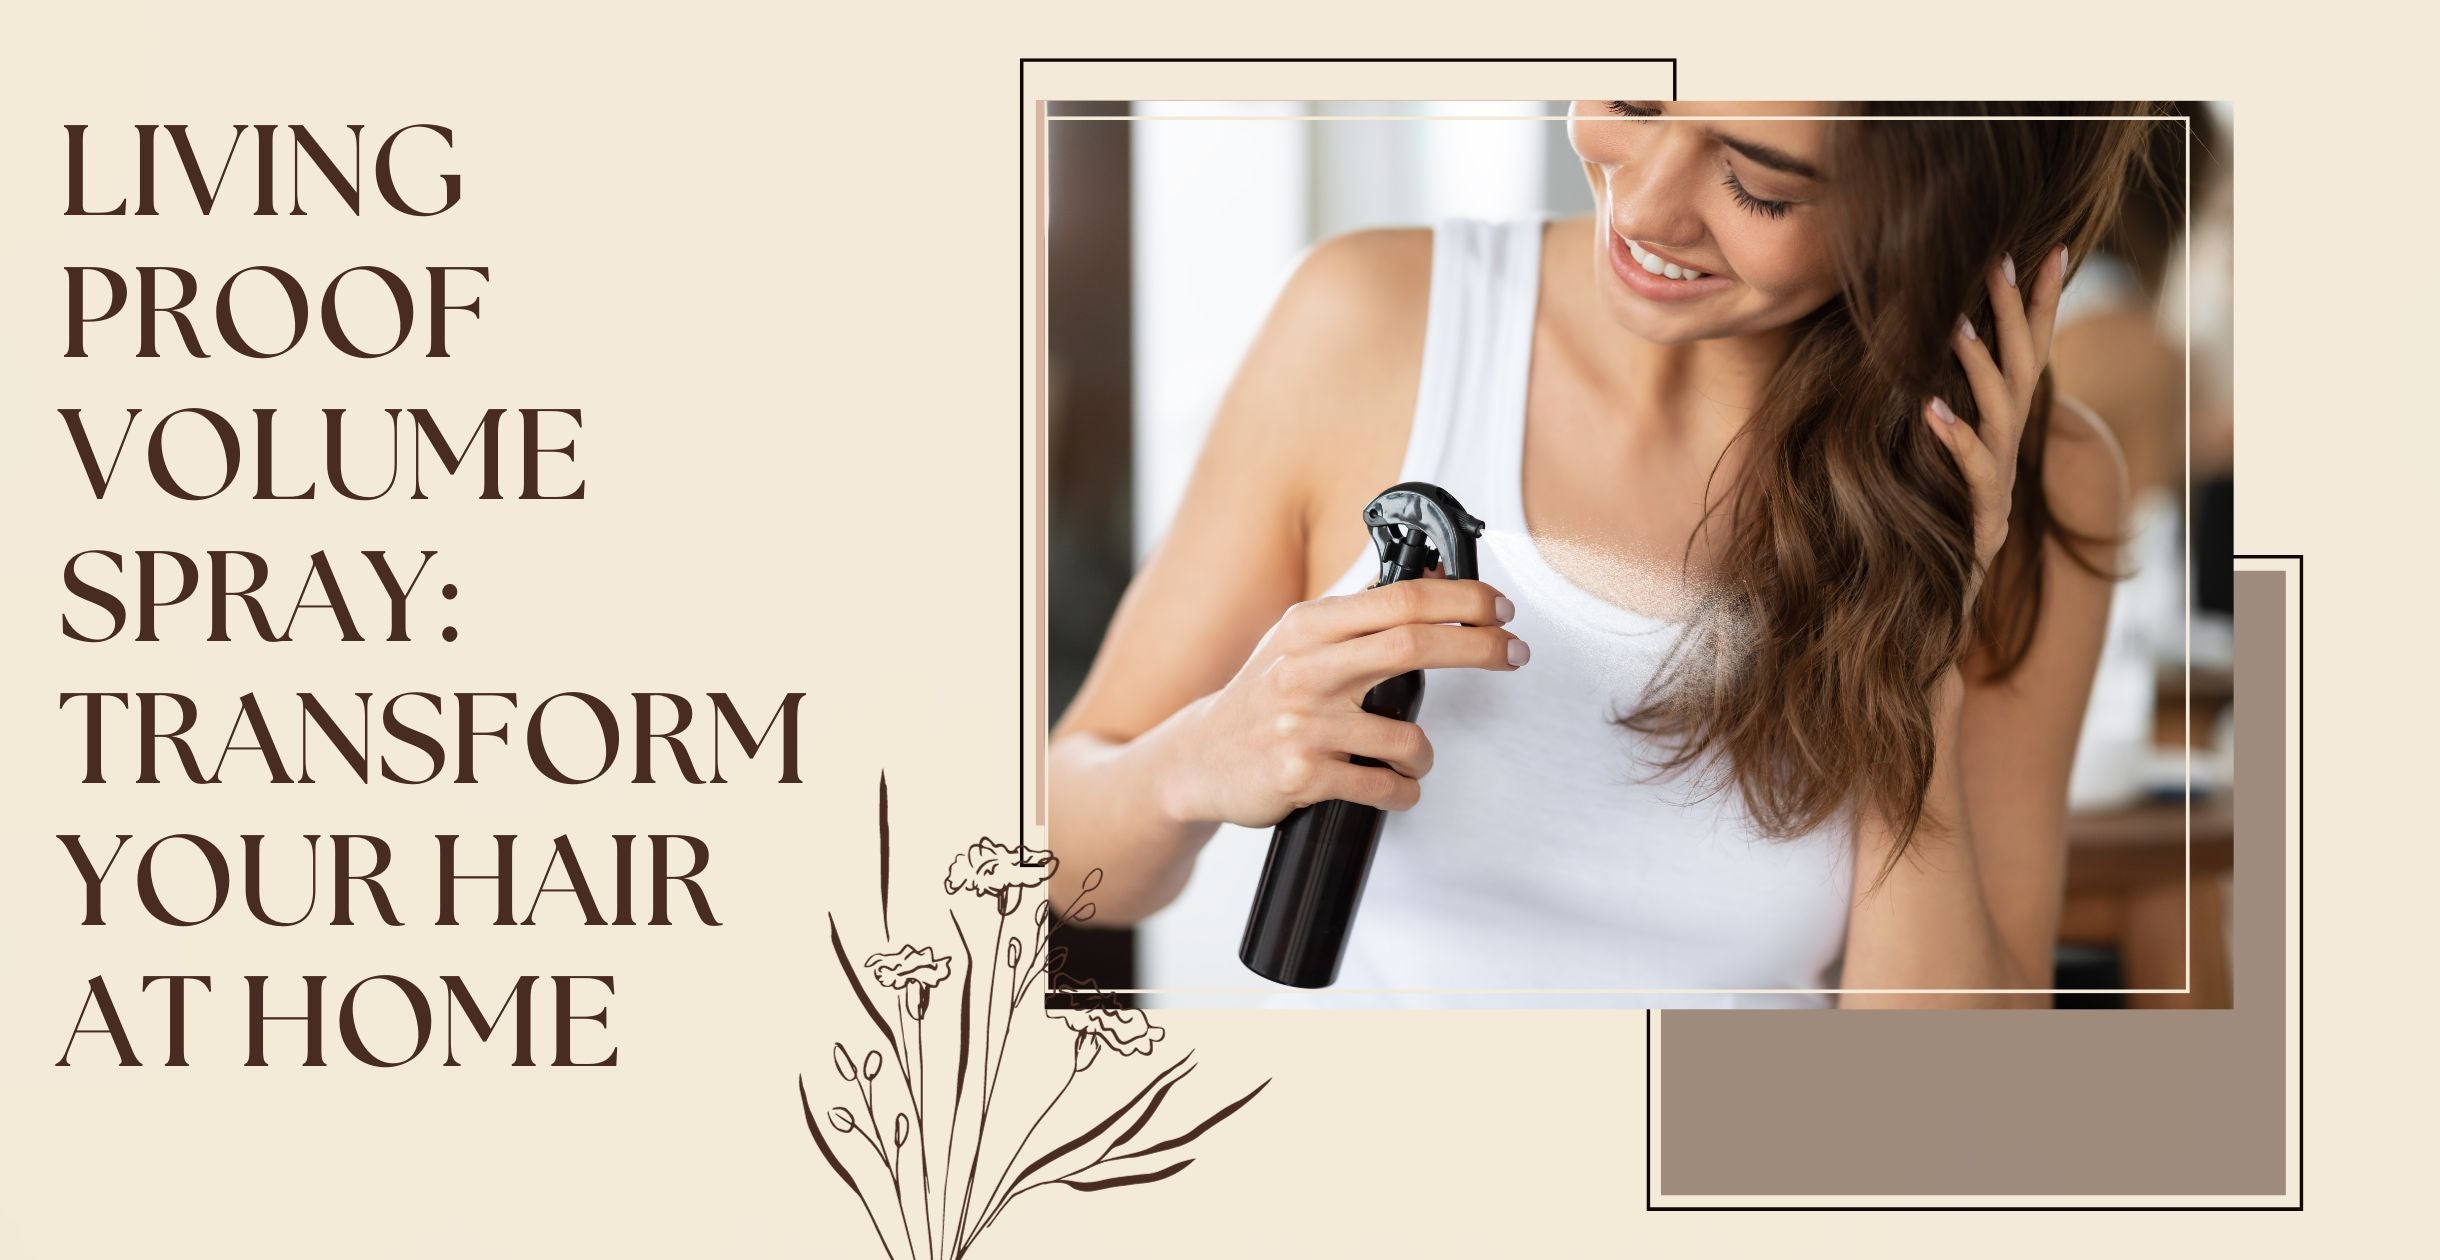 Living Proof Volume Spray: Transform Your Hair at Home